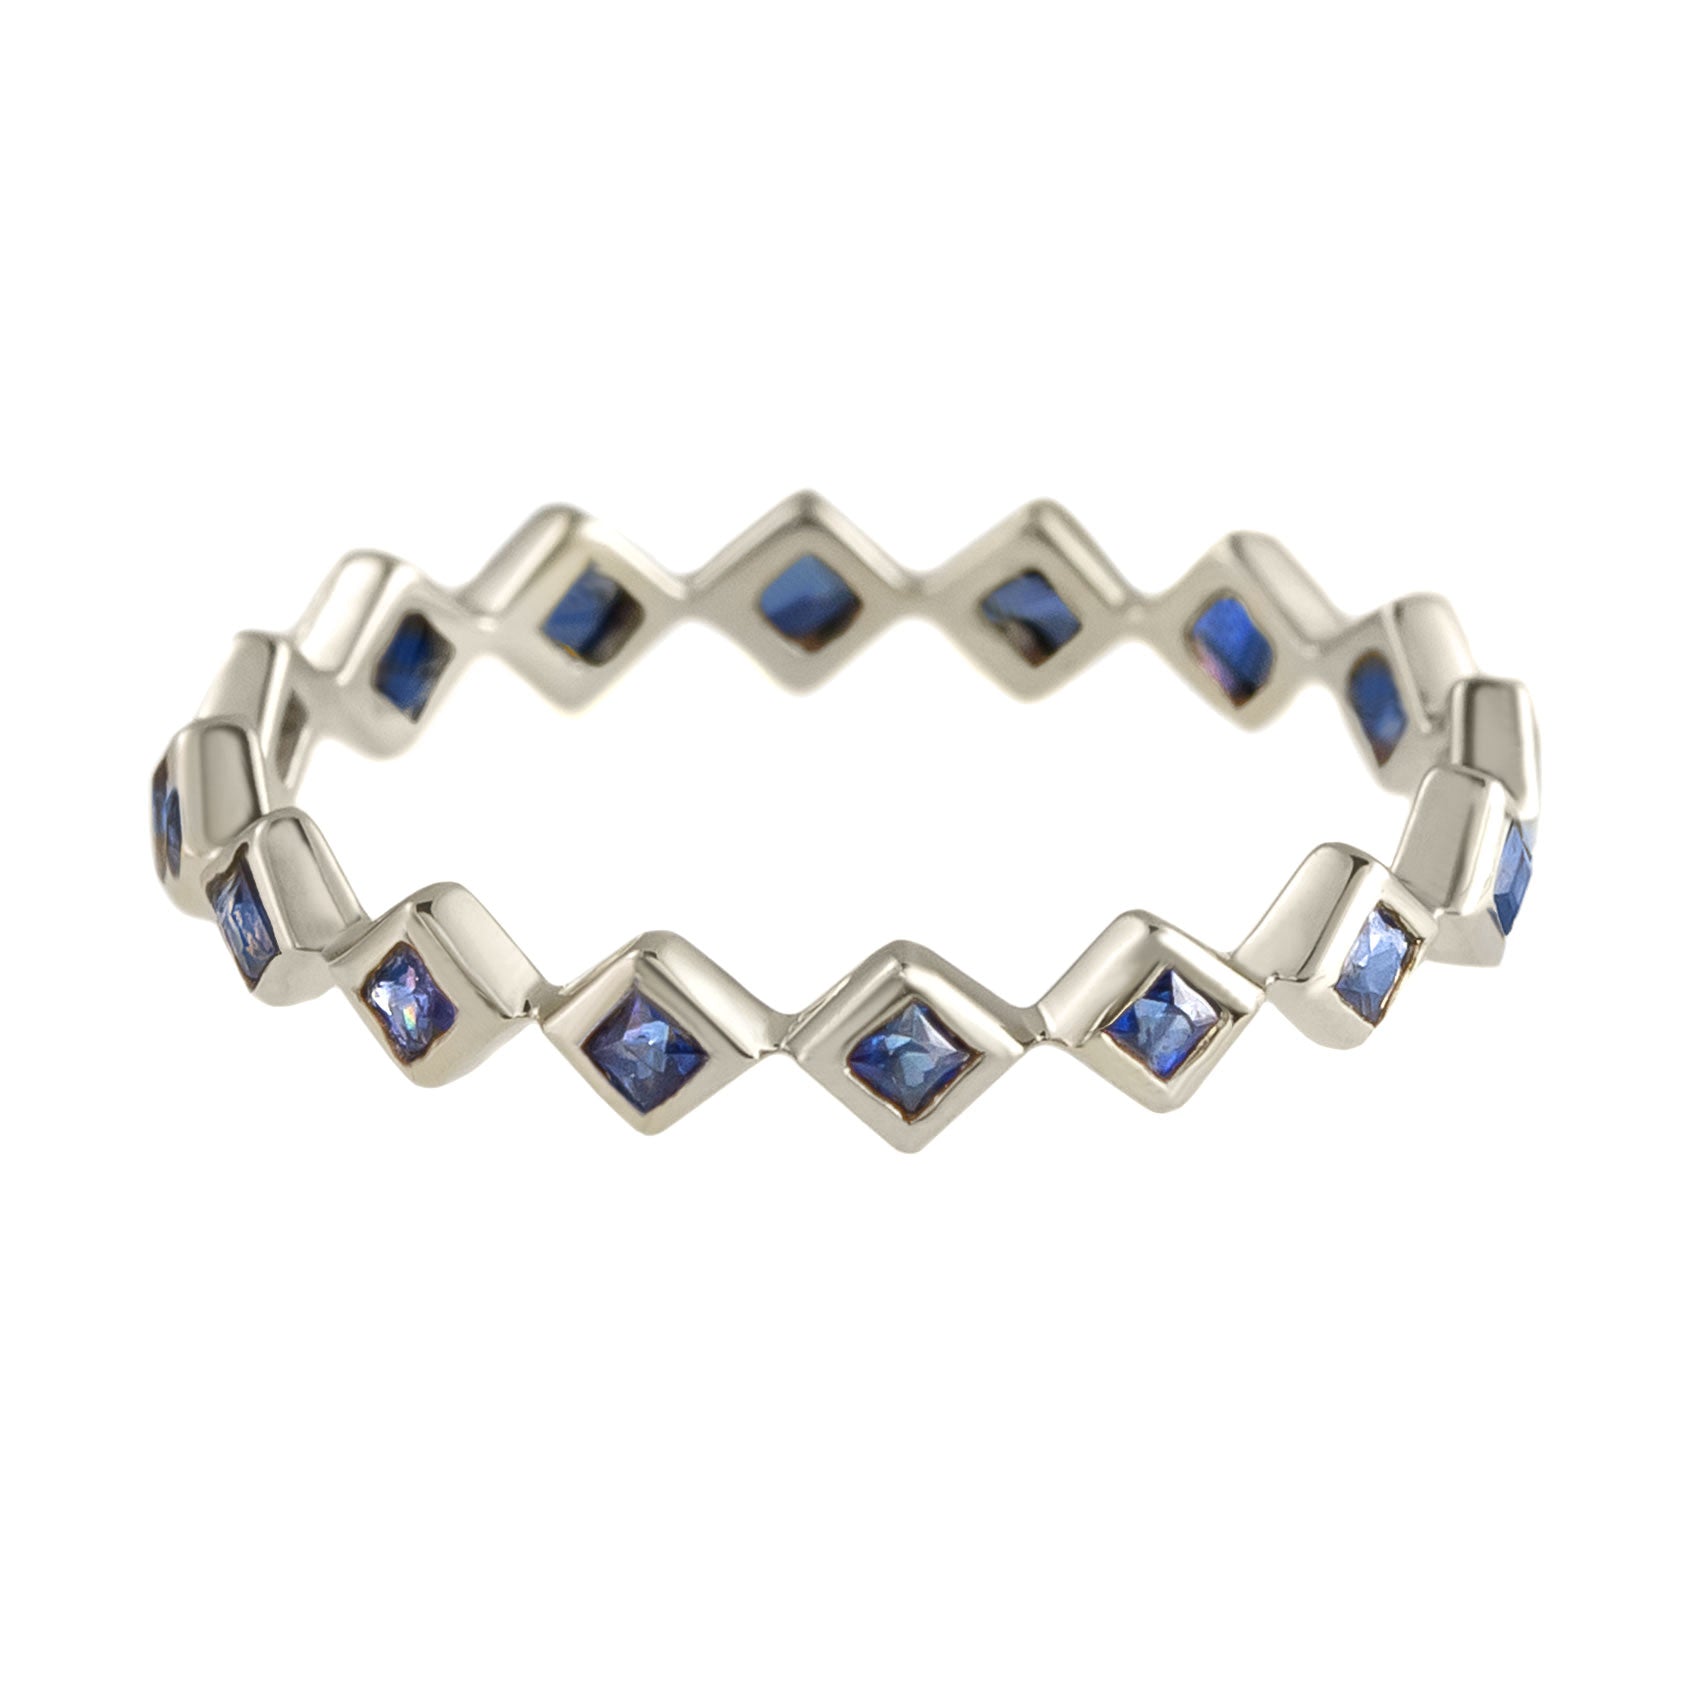 Metier by tomfoolery 9ct White Gold Blue Sapphire Full Eternity Rings. Princess Cut.